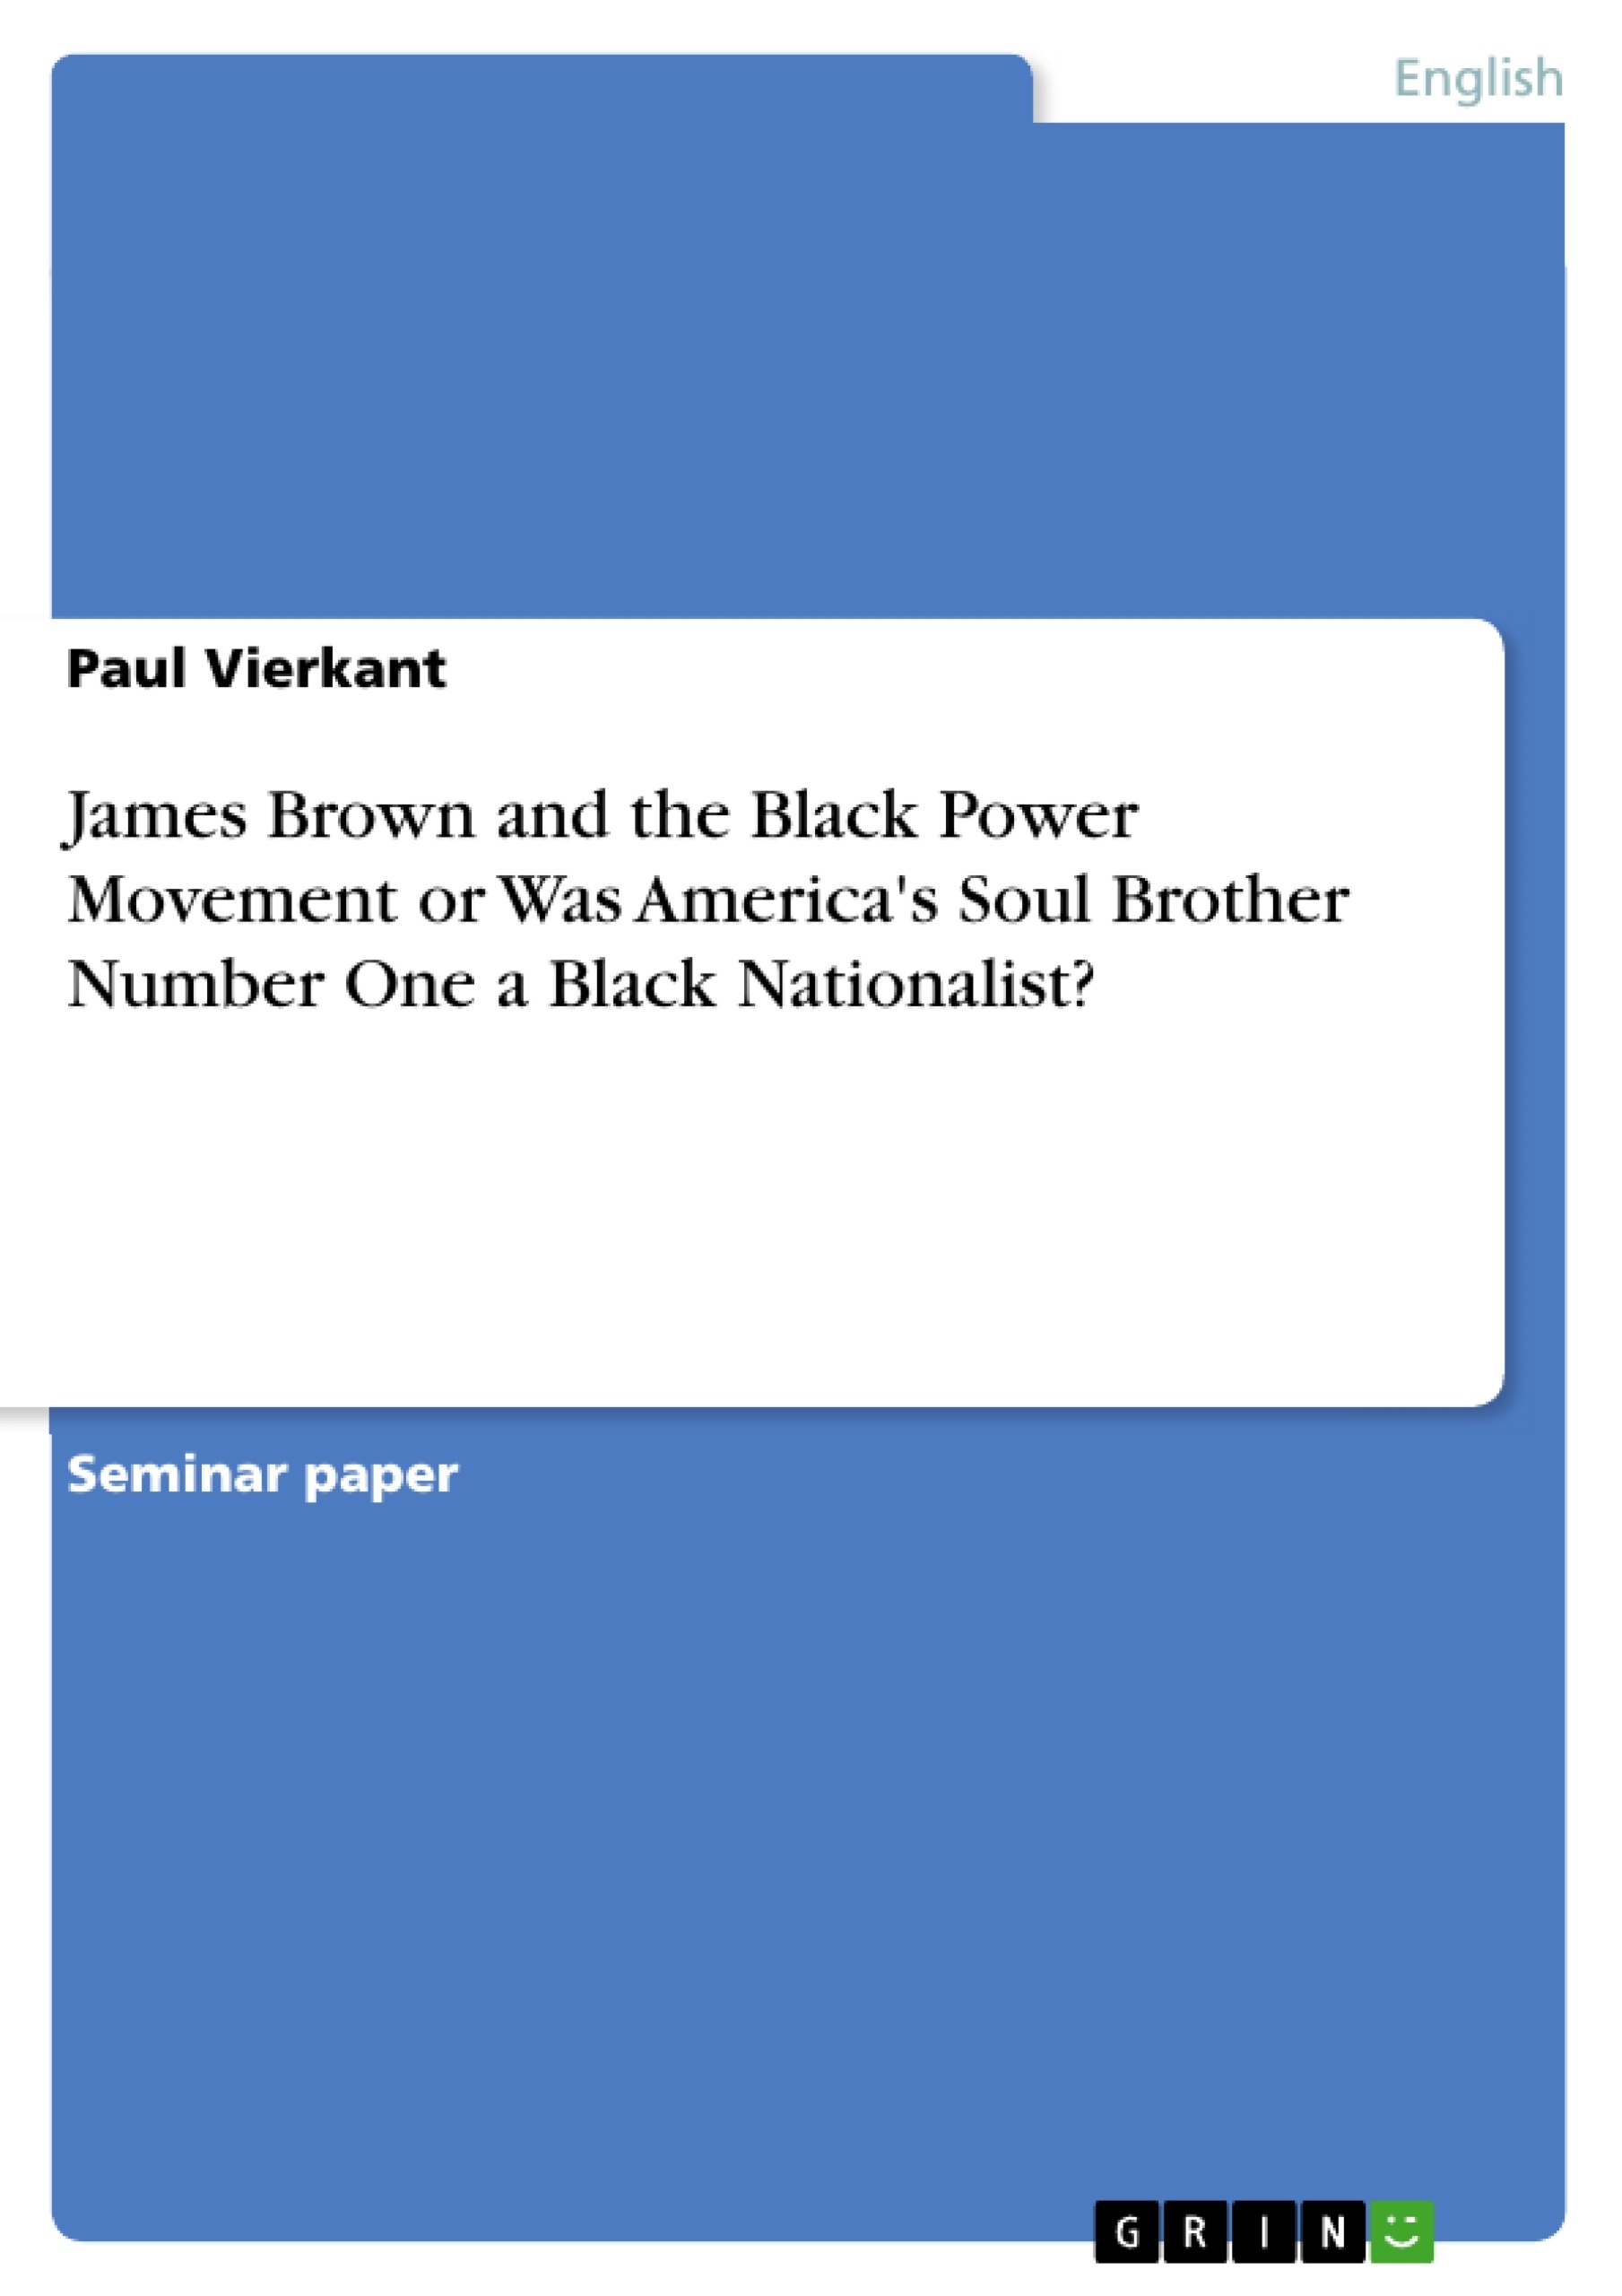 Titel: James Brown and the Black Power Movement or Was America's Soul Brother Number One a Black Nationalist?